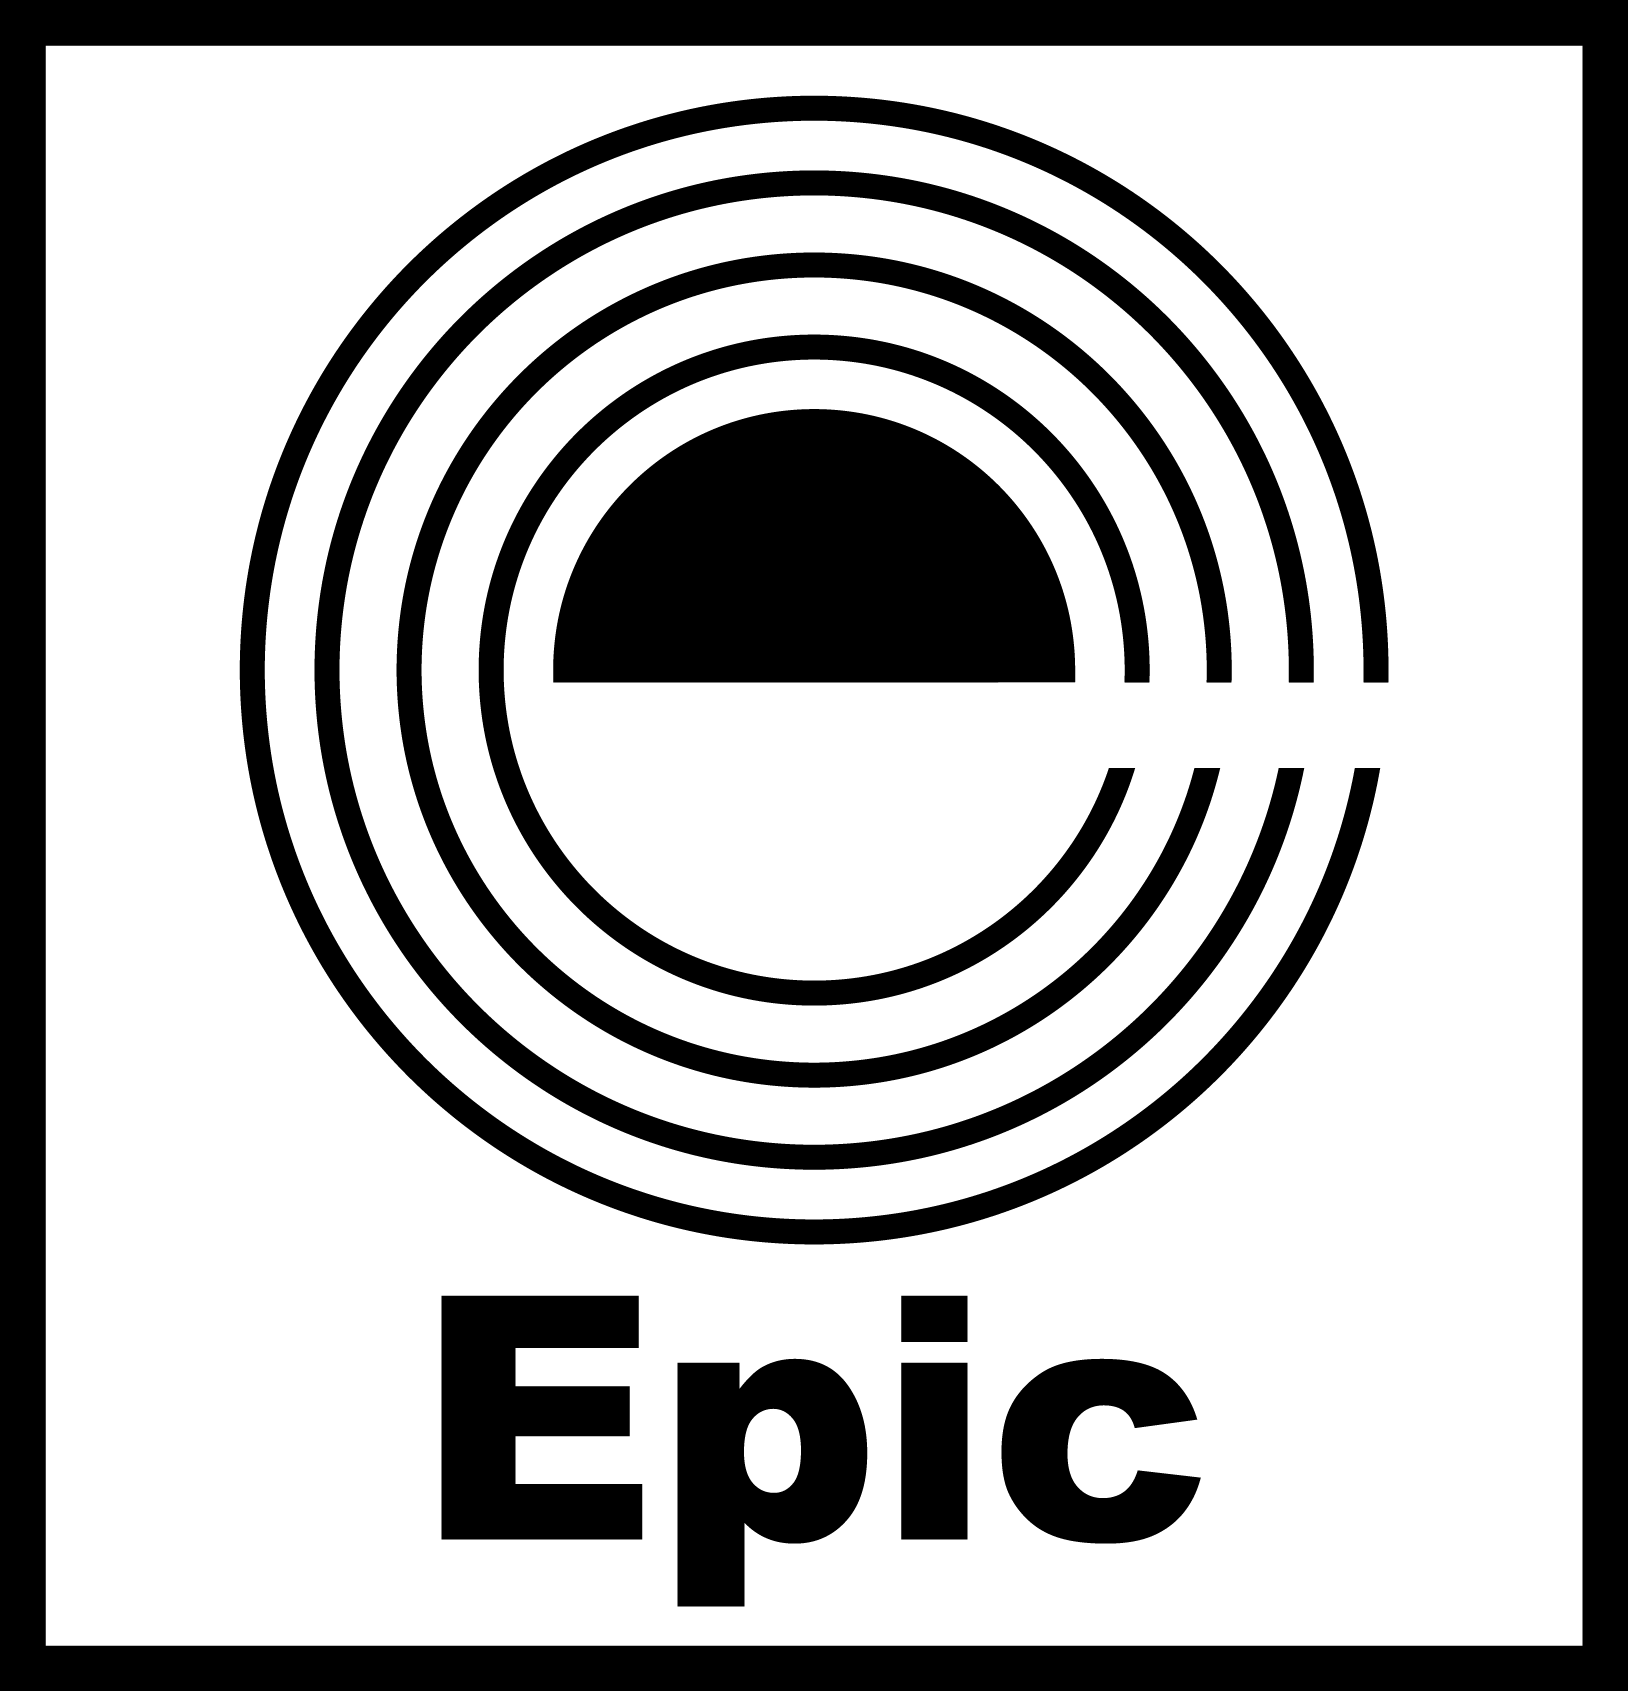 Black Record Logo - Epic Records - Wikiwand